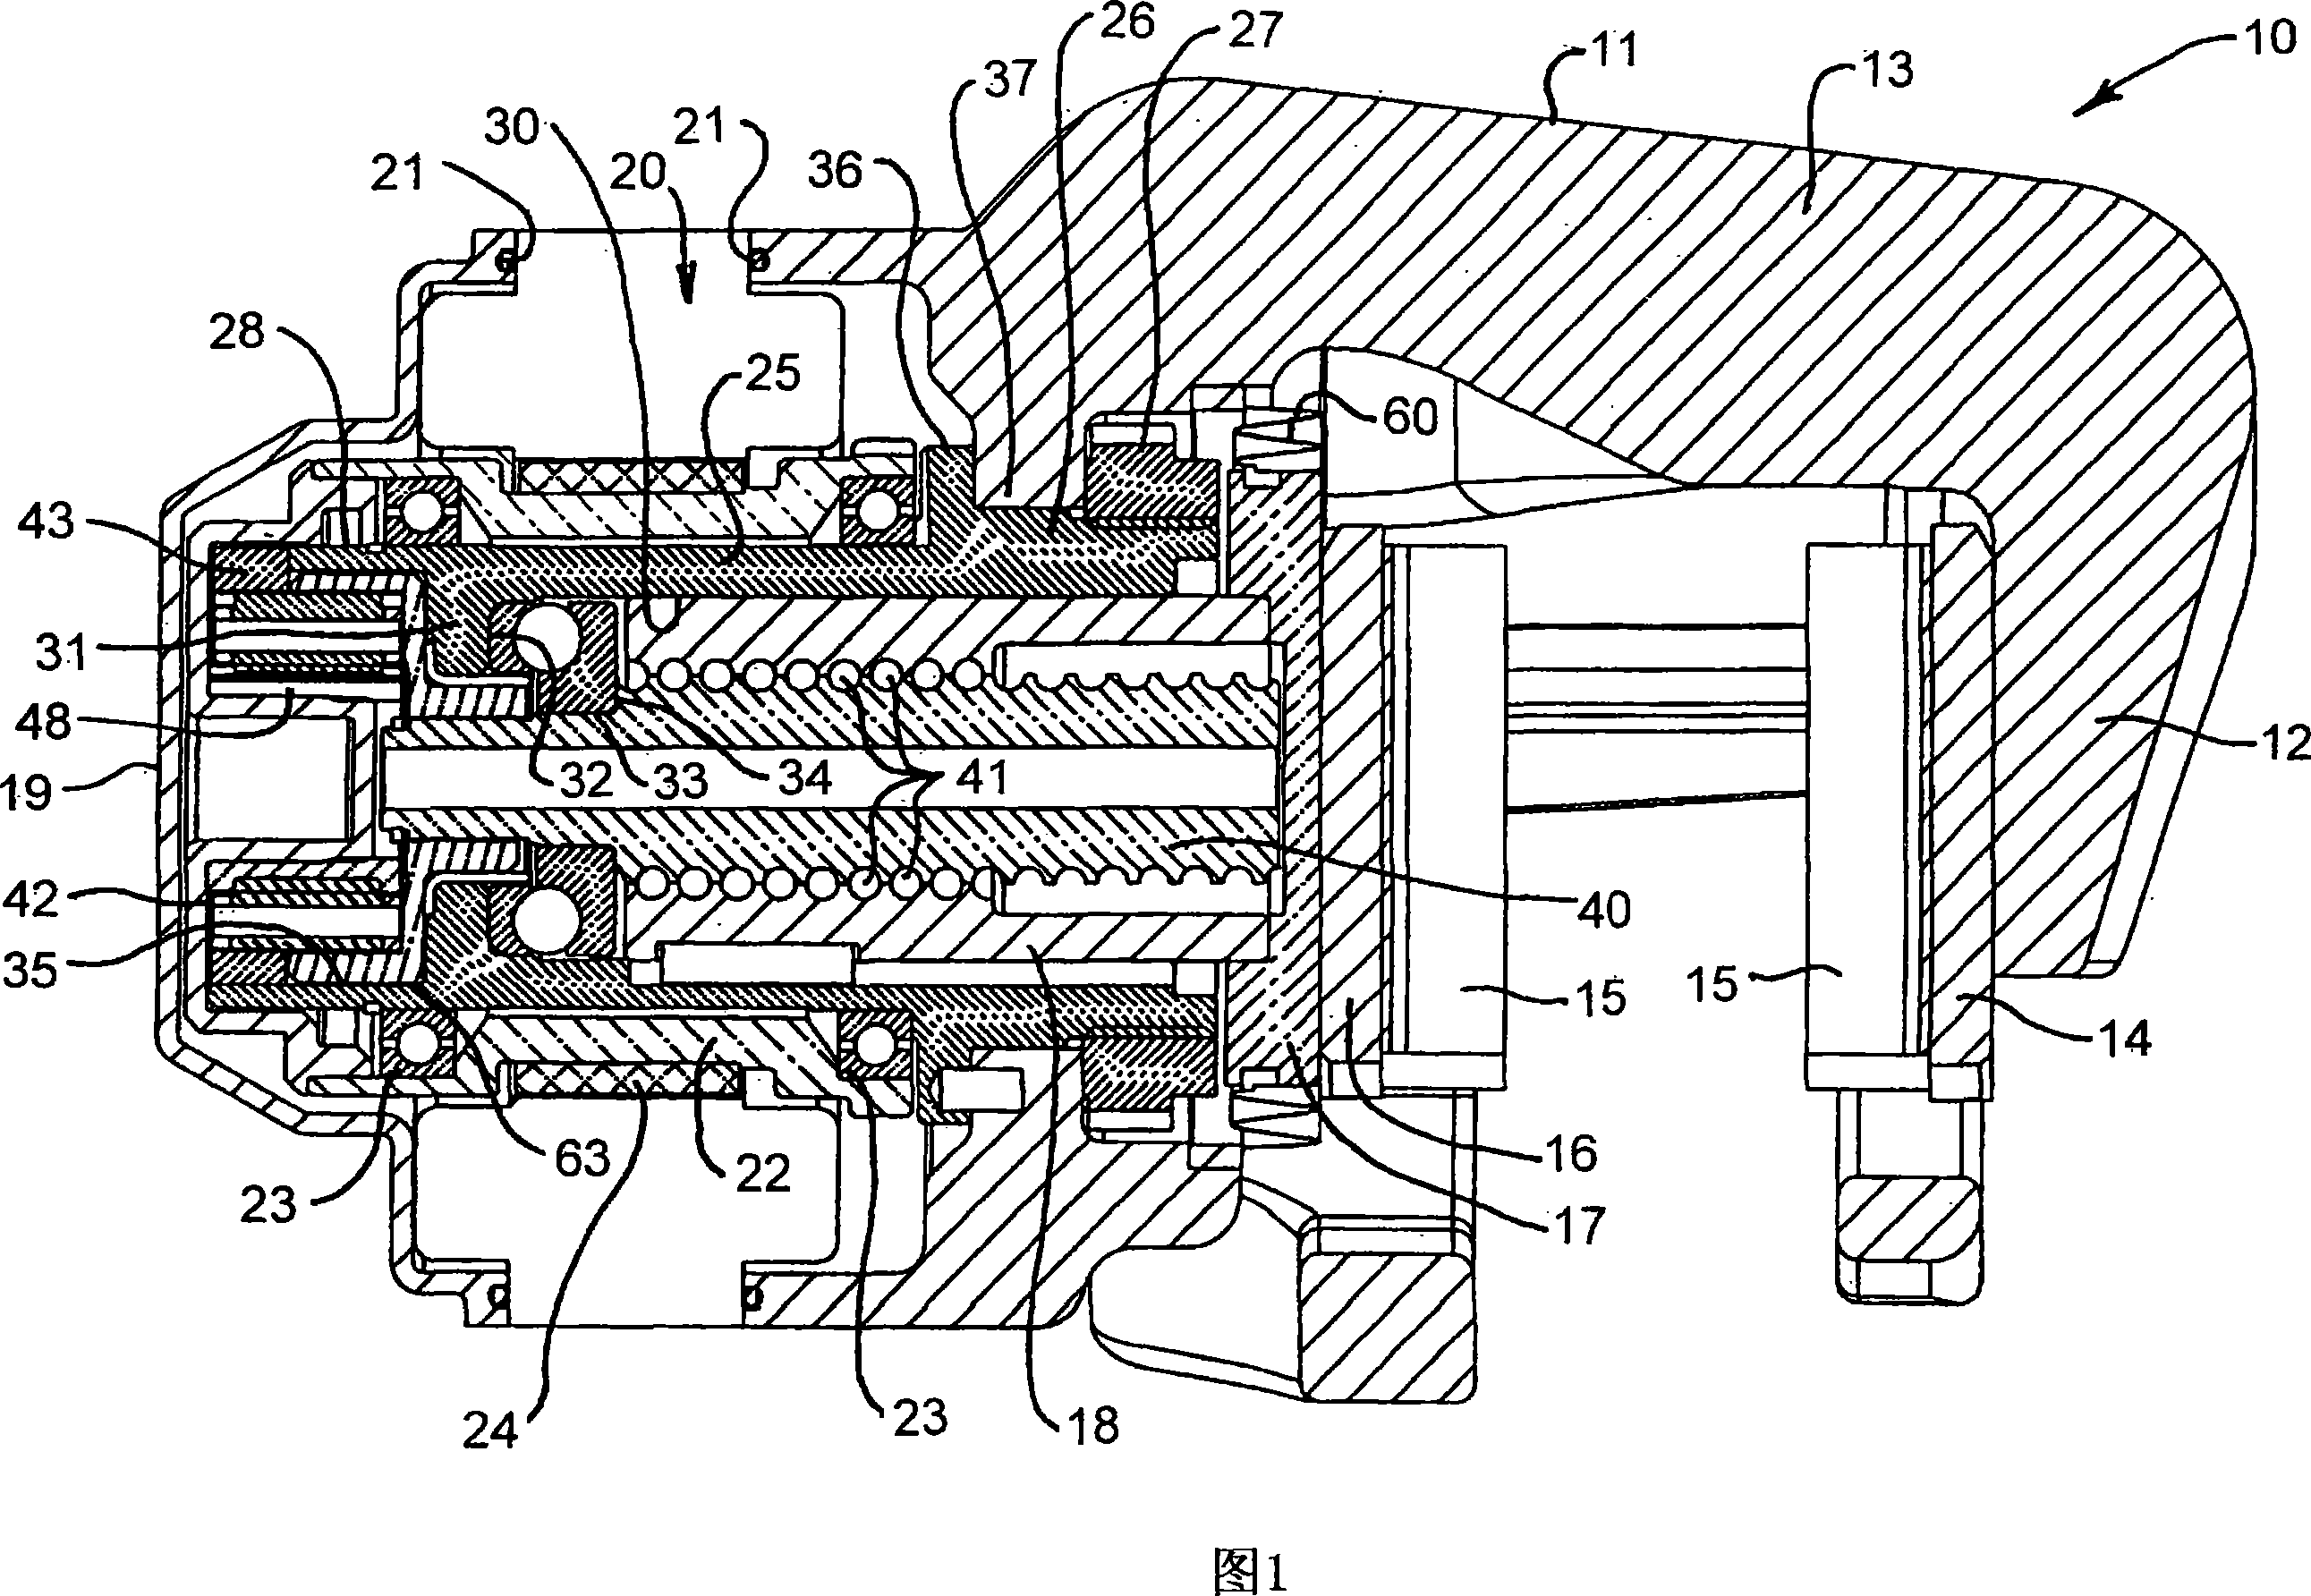 Actuating mechanism and brake assembly